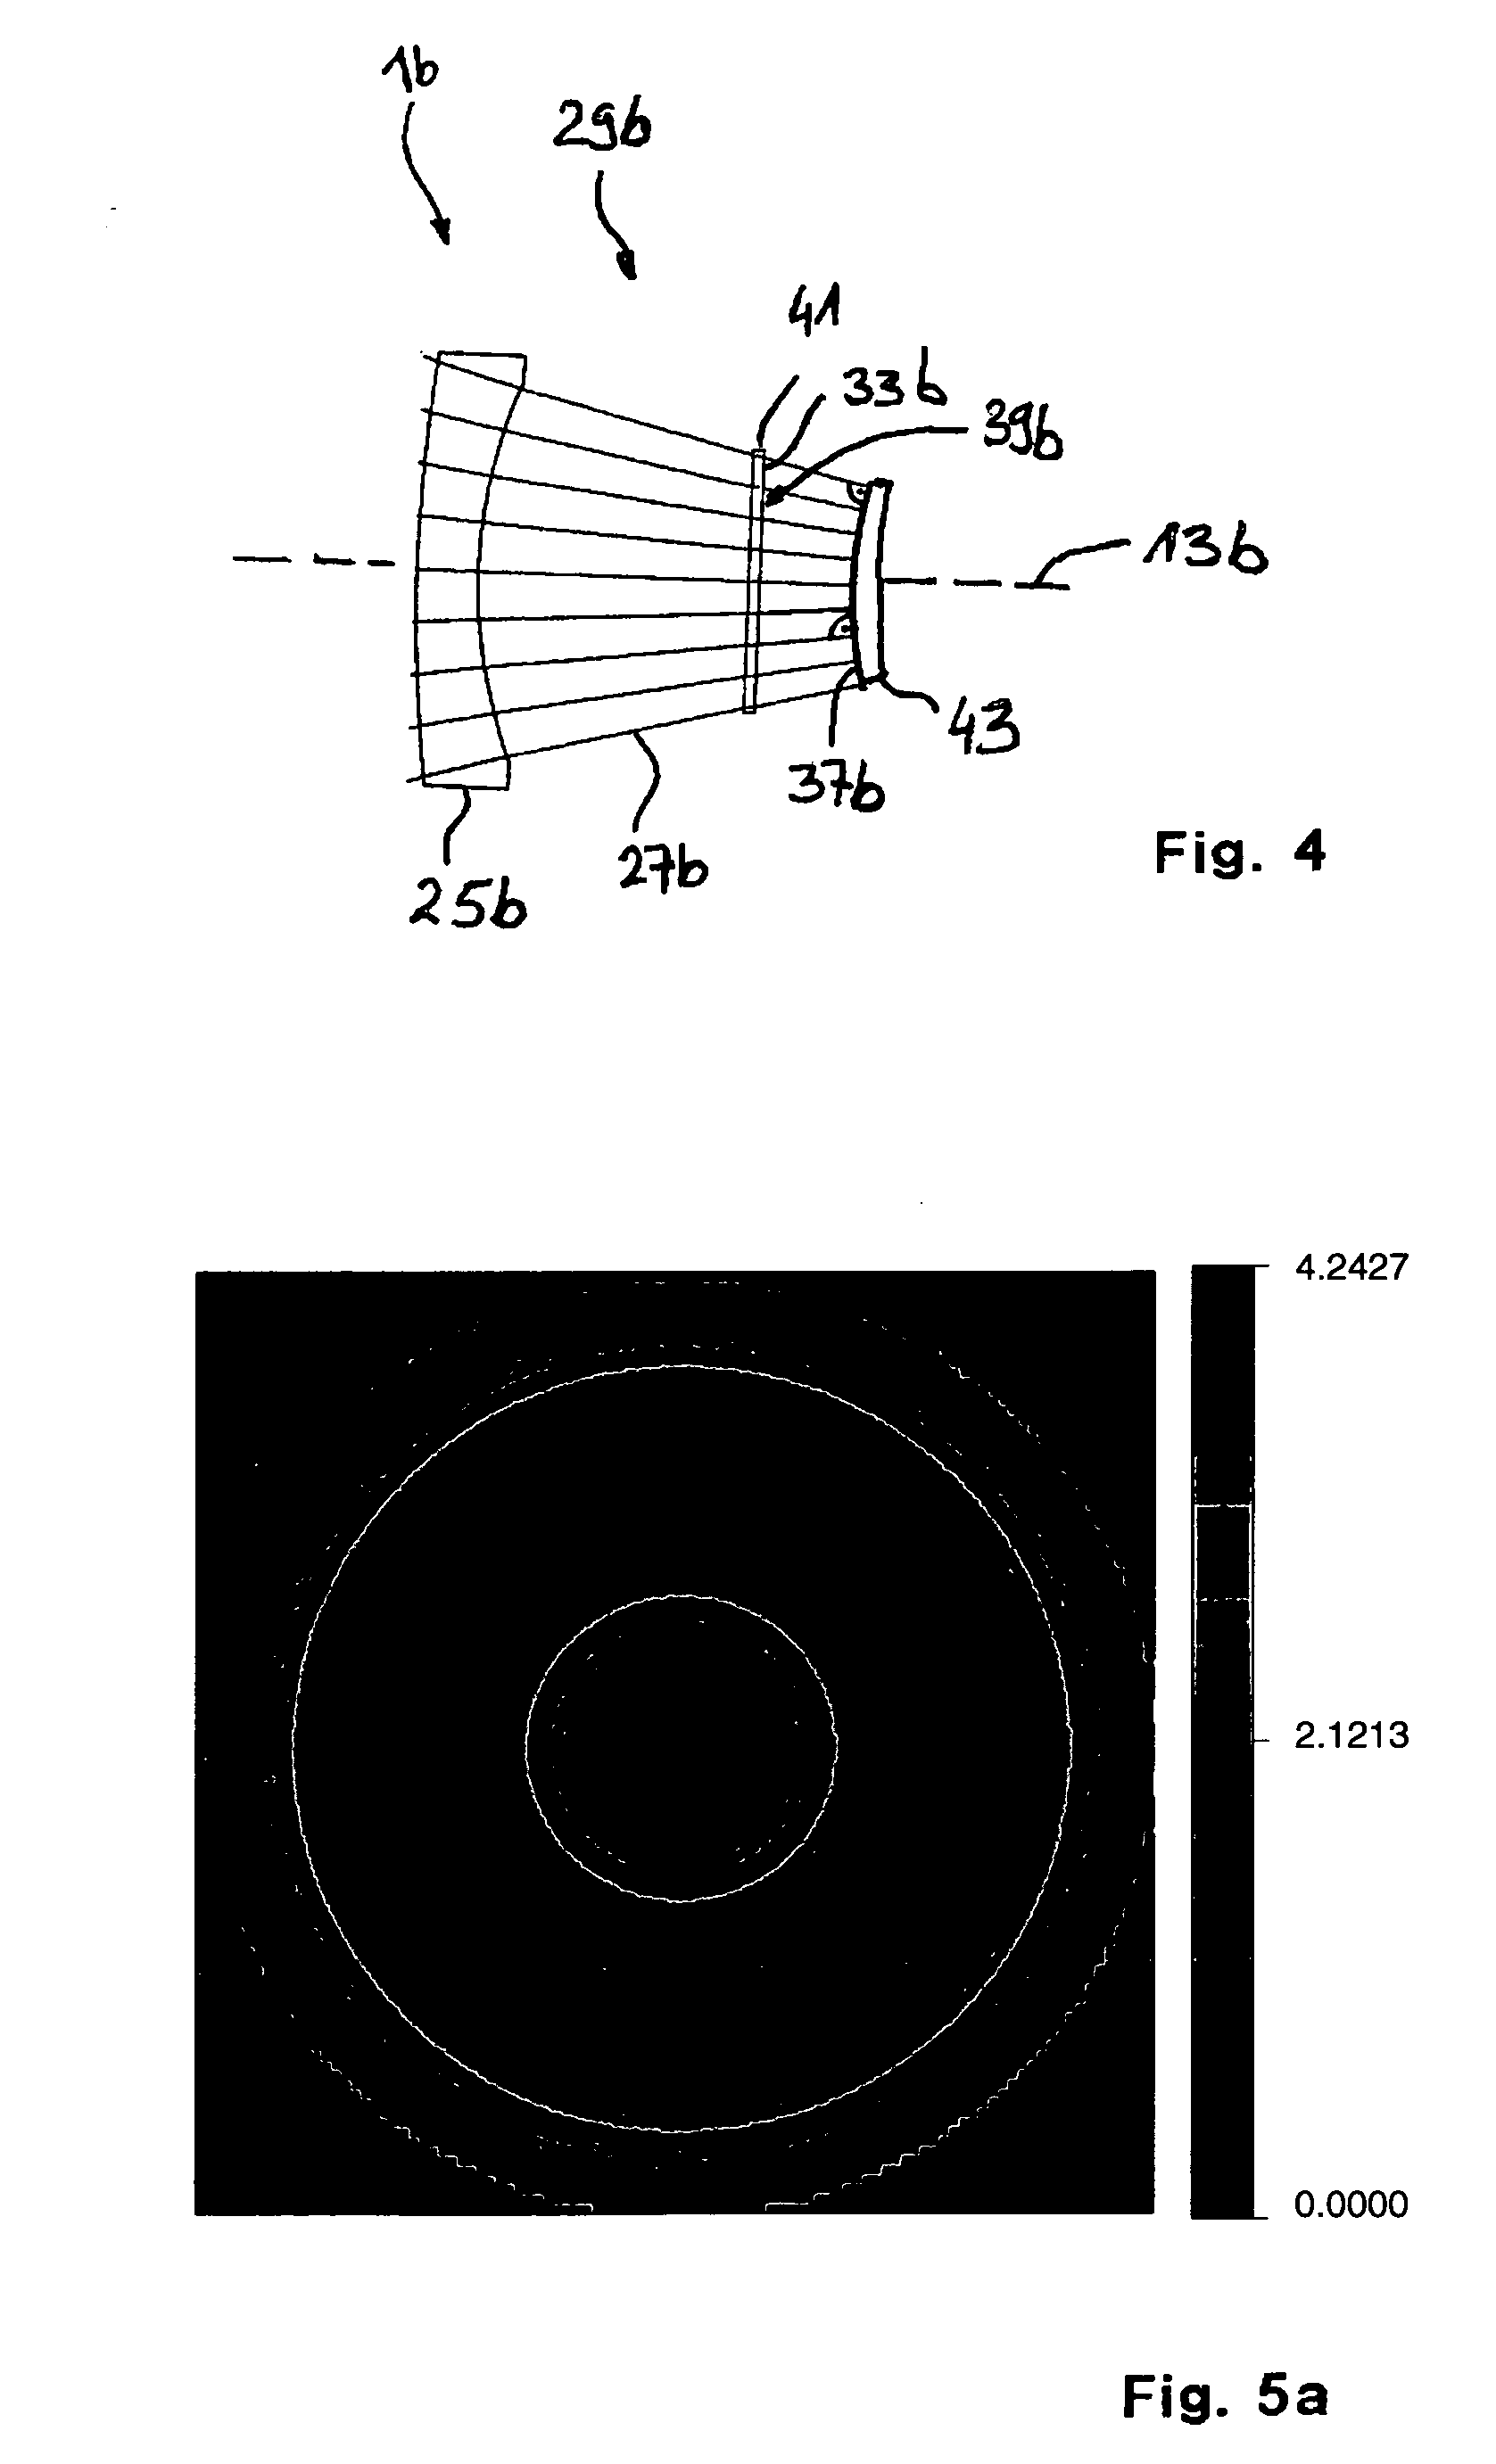 Method of calibrating an interferometer and method of manufacturing an optical element